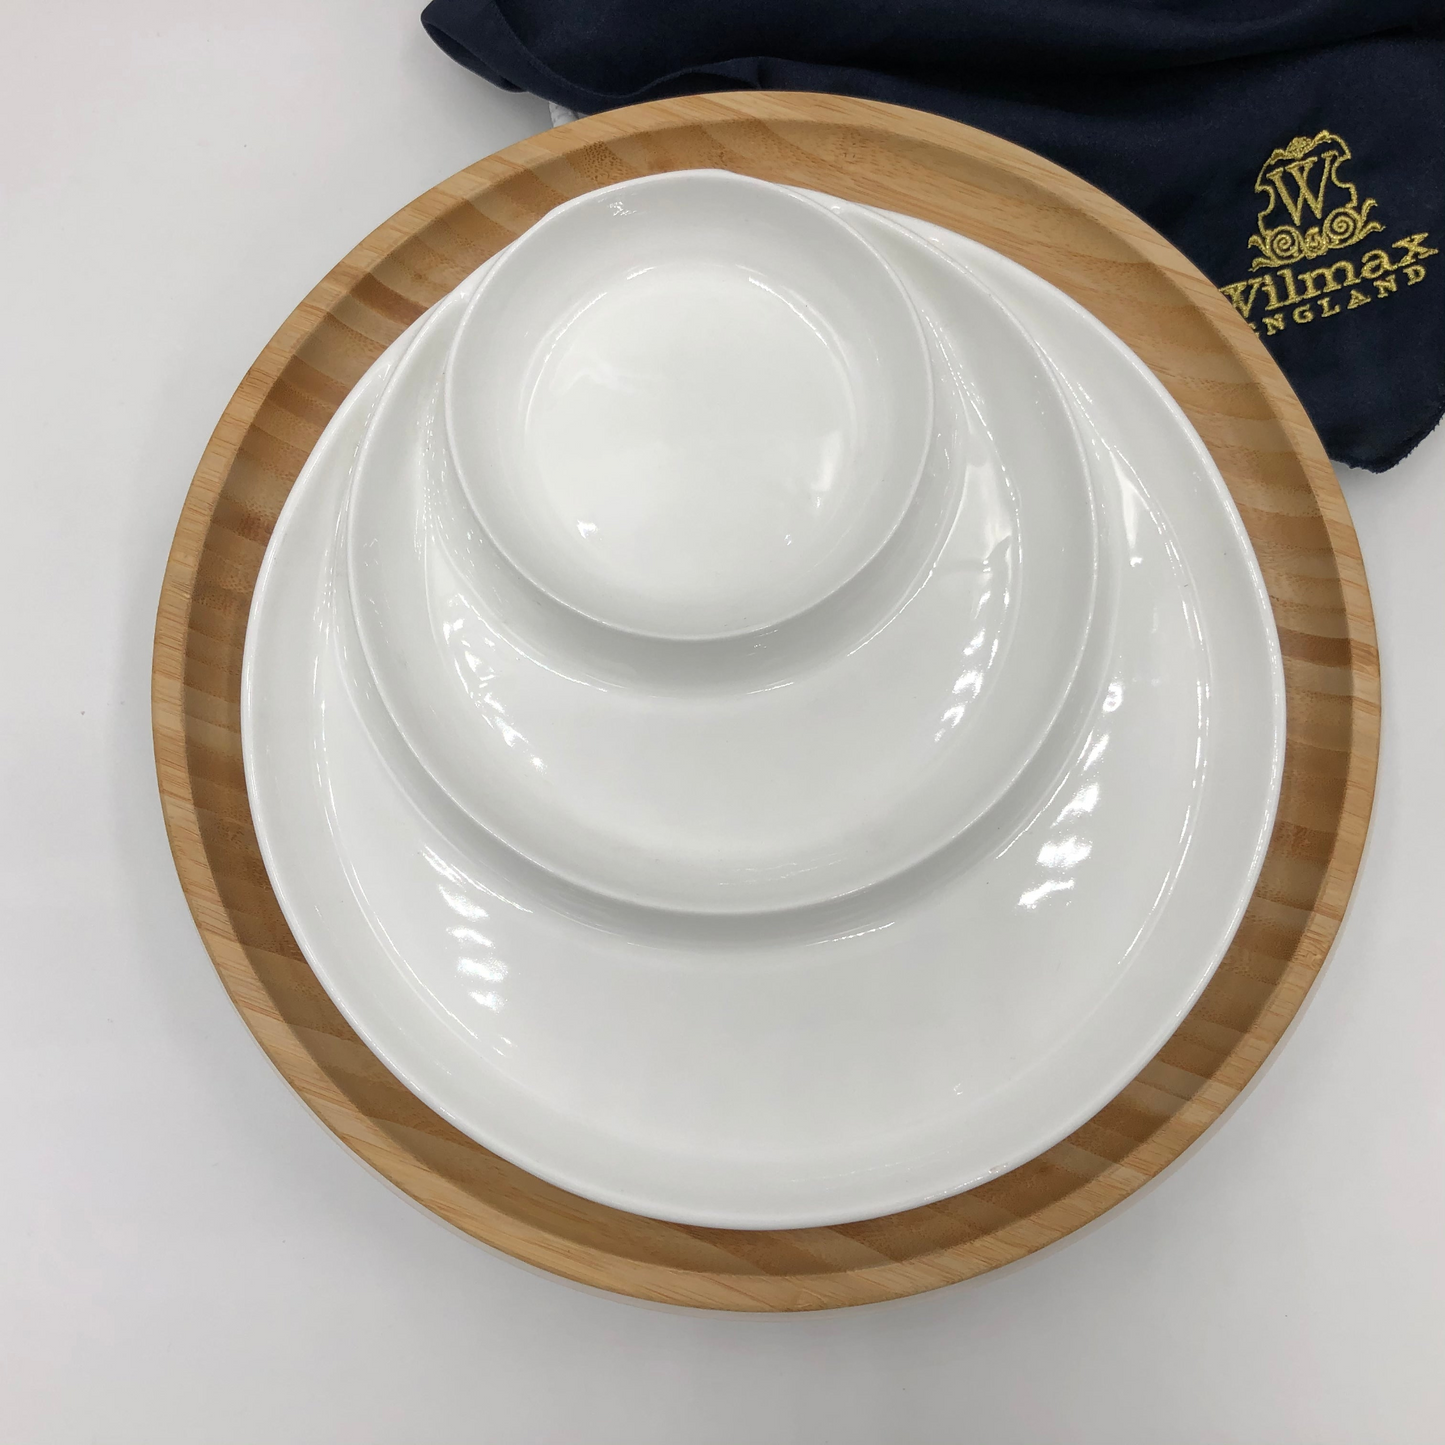 Wilmax Bamboo And Fine Porcelain 3 Section Divided Dish/plate Setting WL-555070